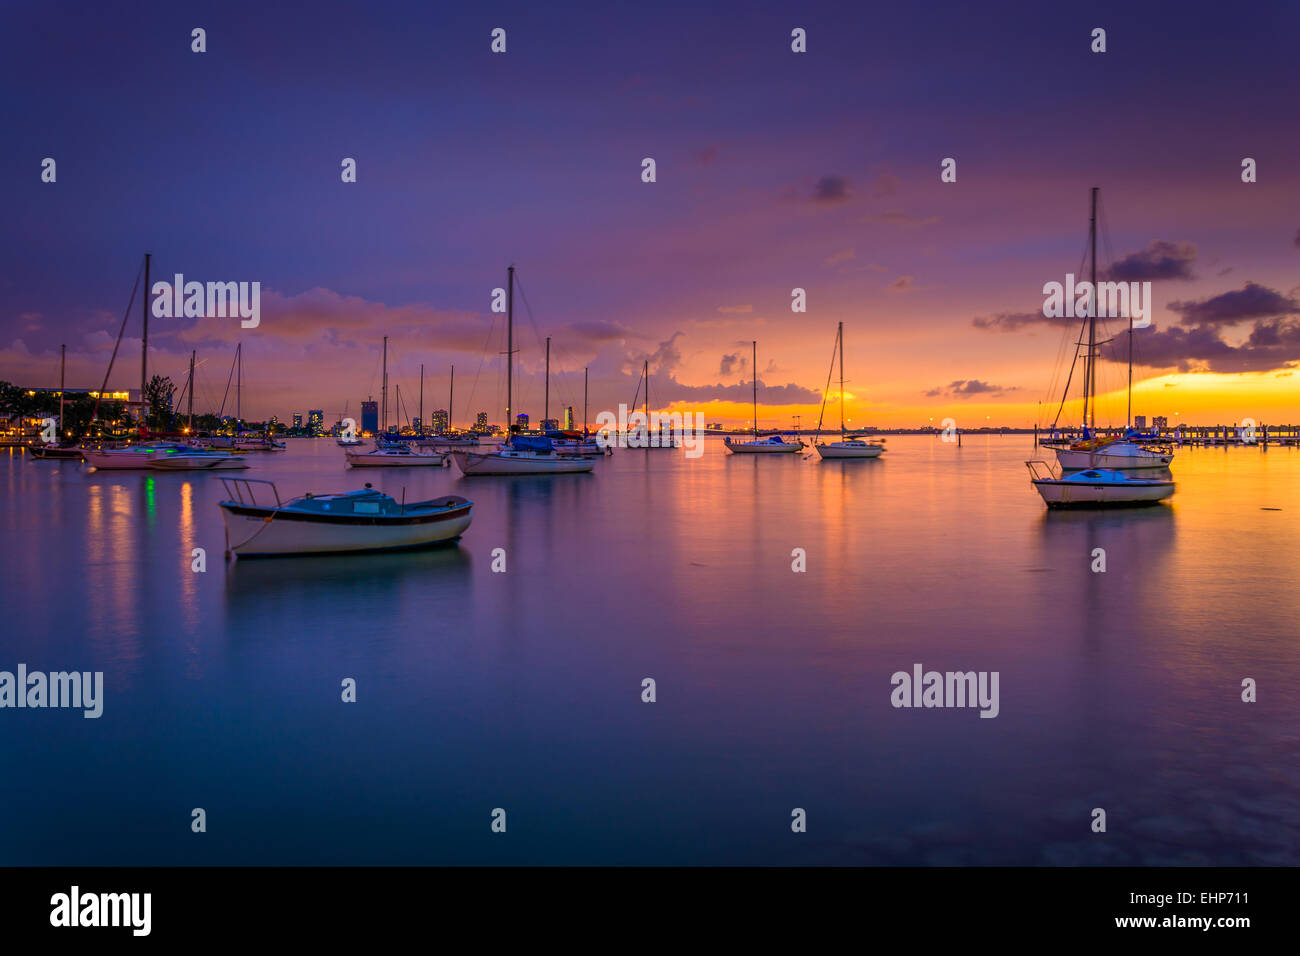 Boats in Biscayne Bay at sunset, seen from Miami Beach, Florida. Stock Photo